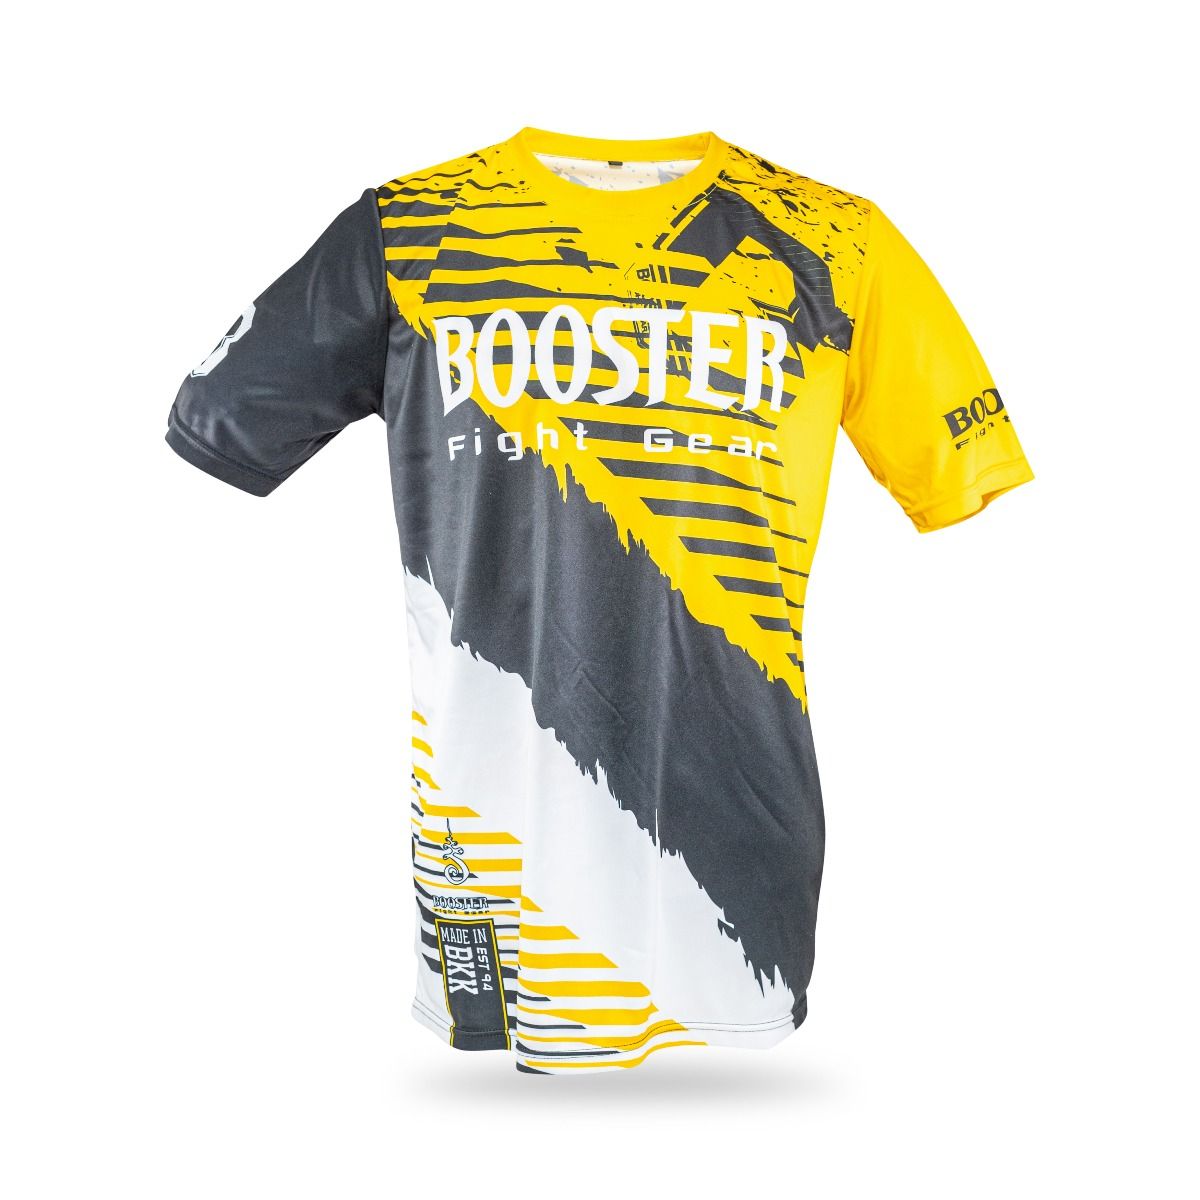 Booster AD racer Tee 1